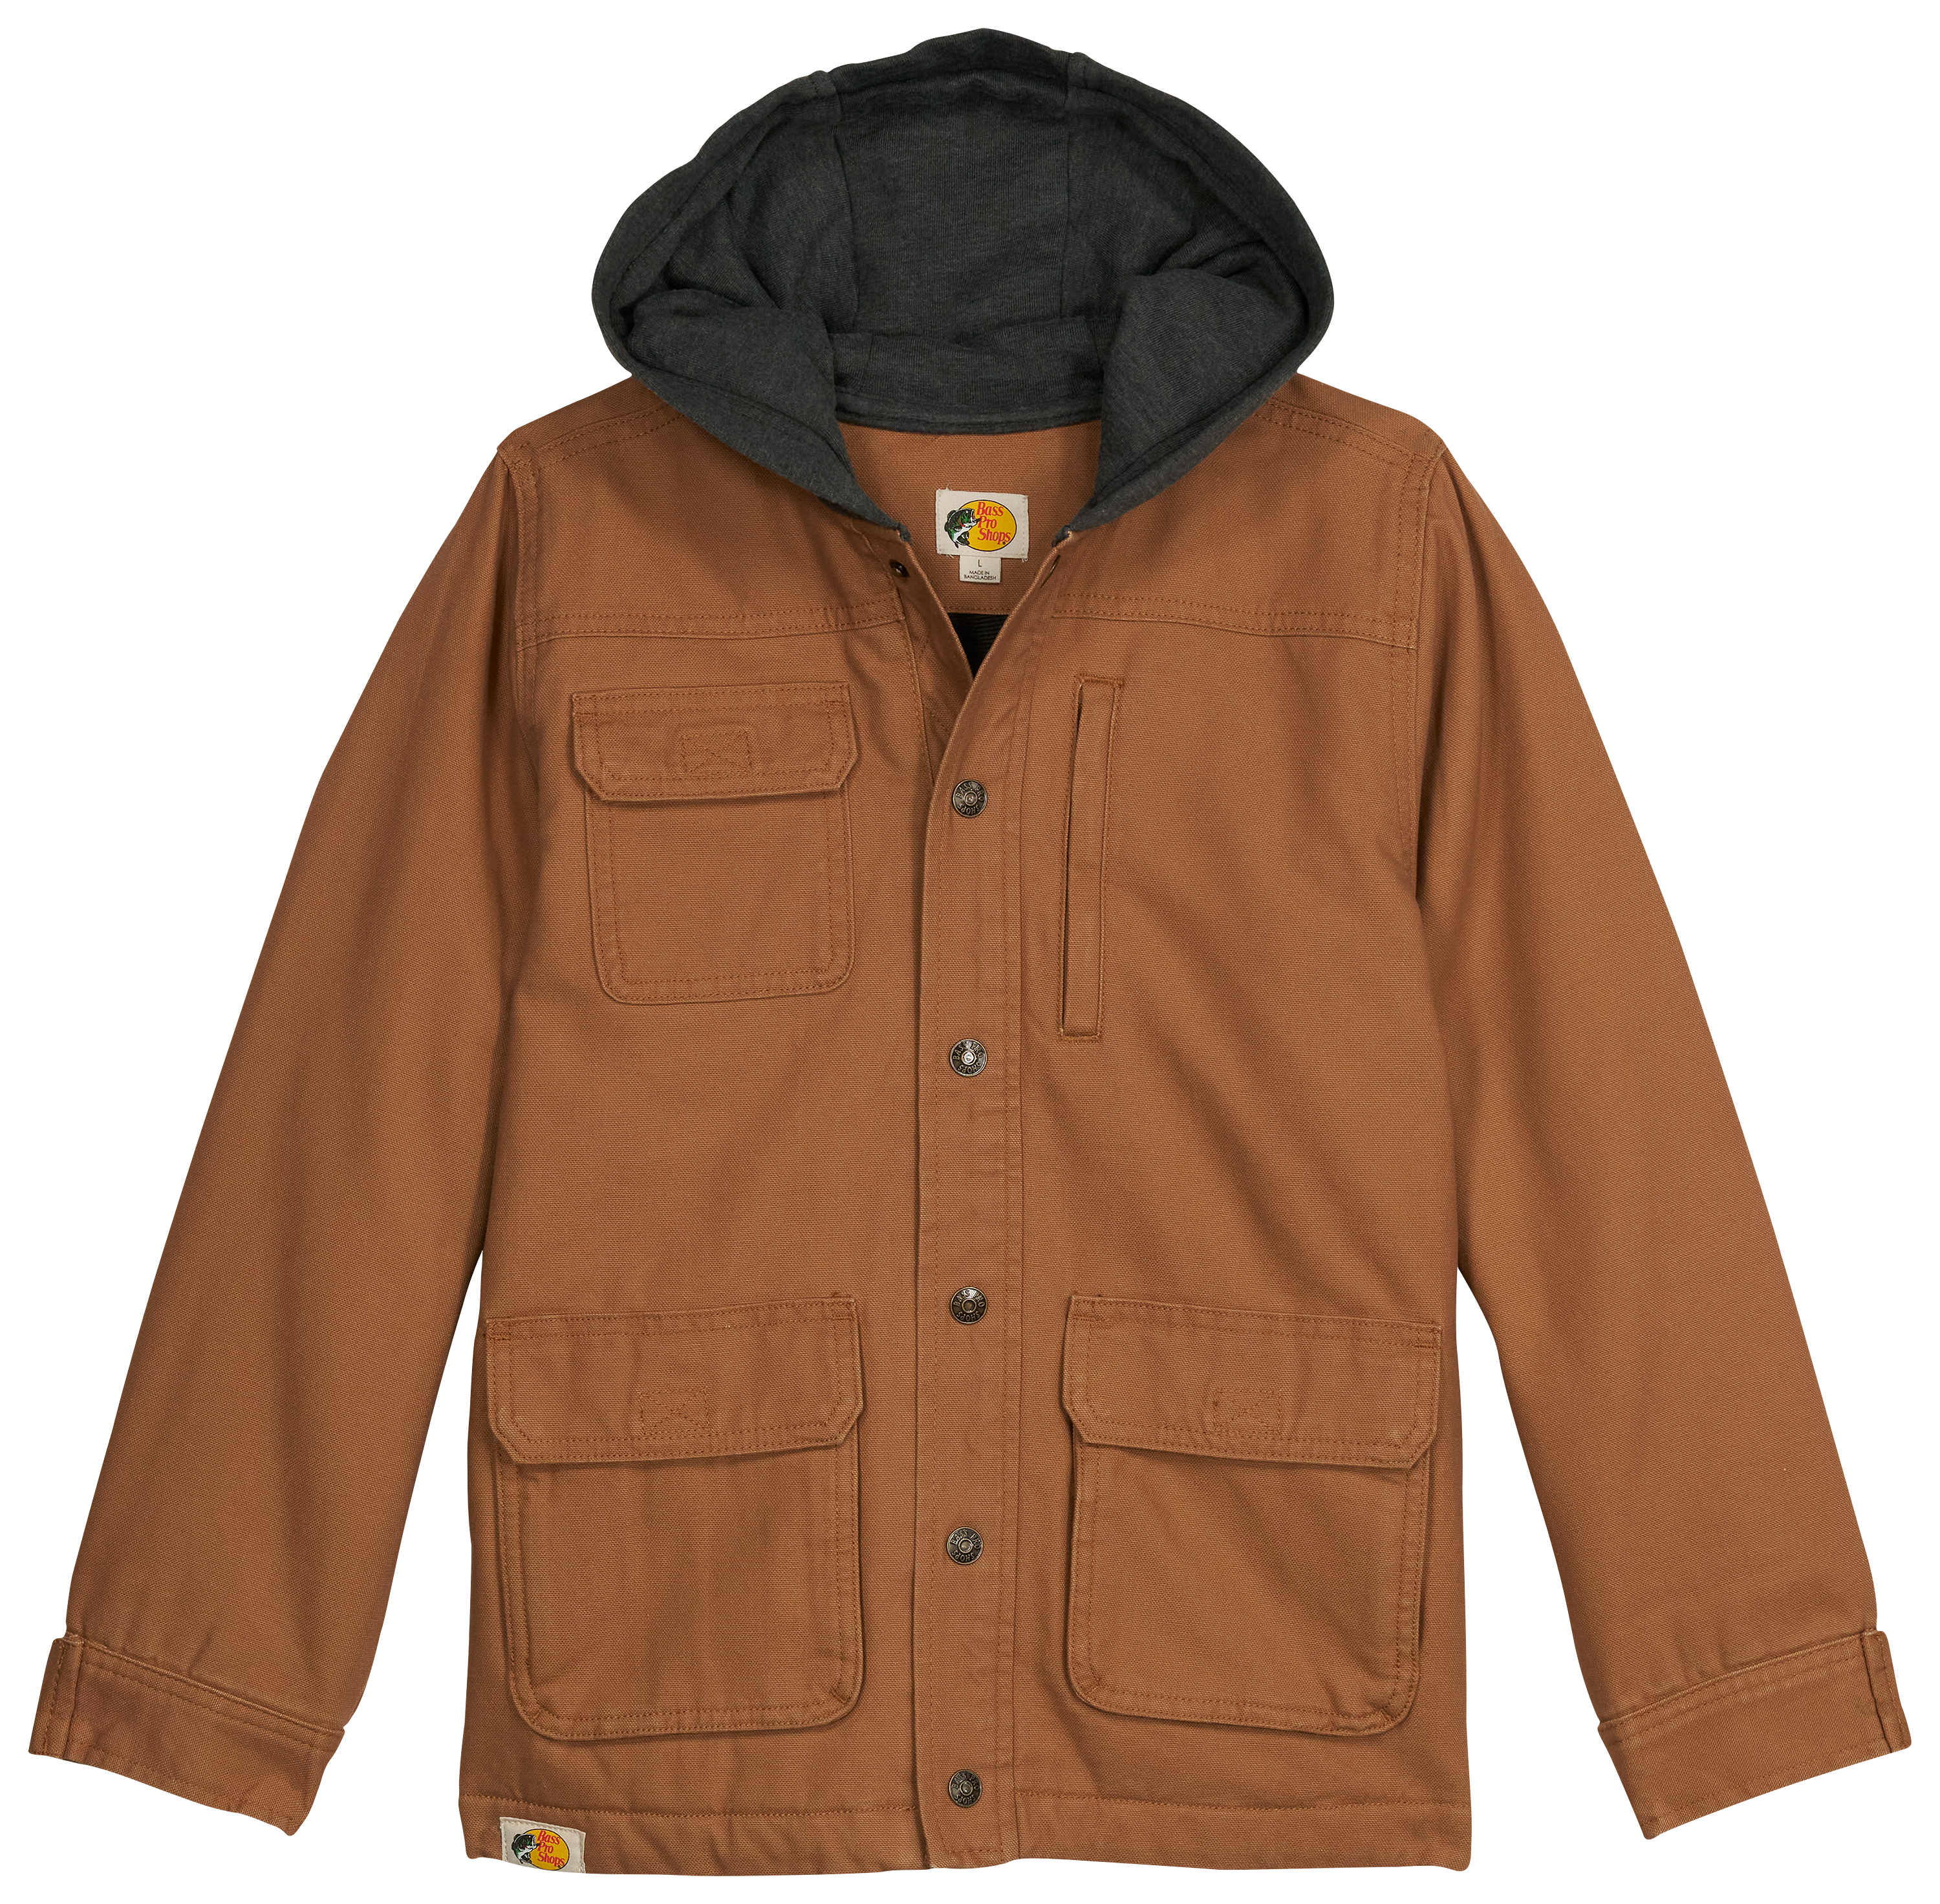 Bass Pro Shops Snap-Front Hooded Work Jacket for Kids